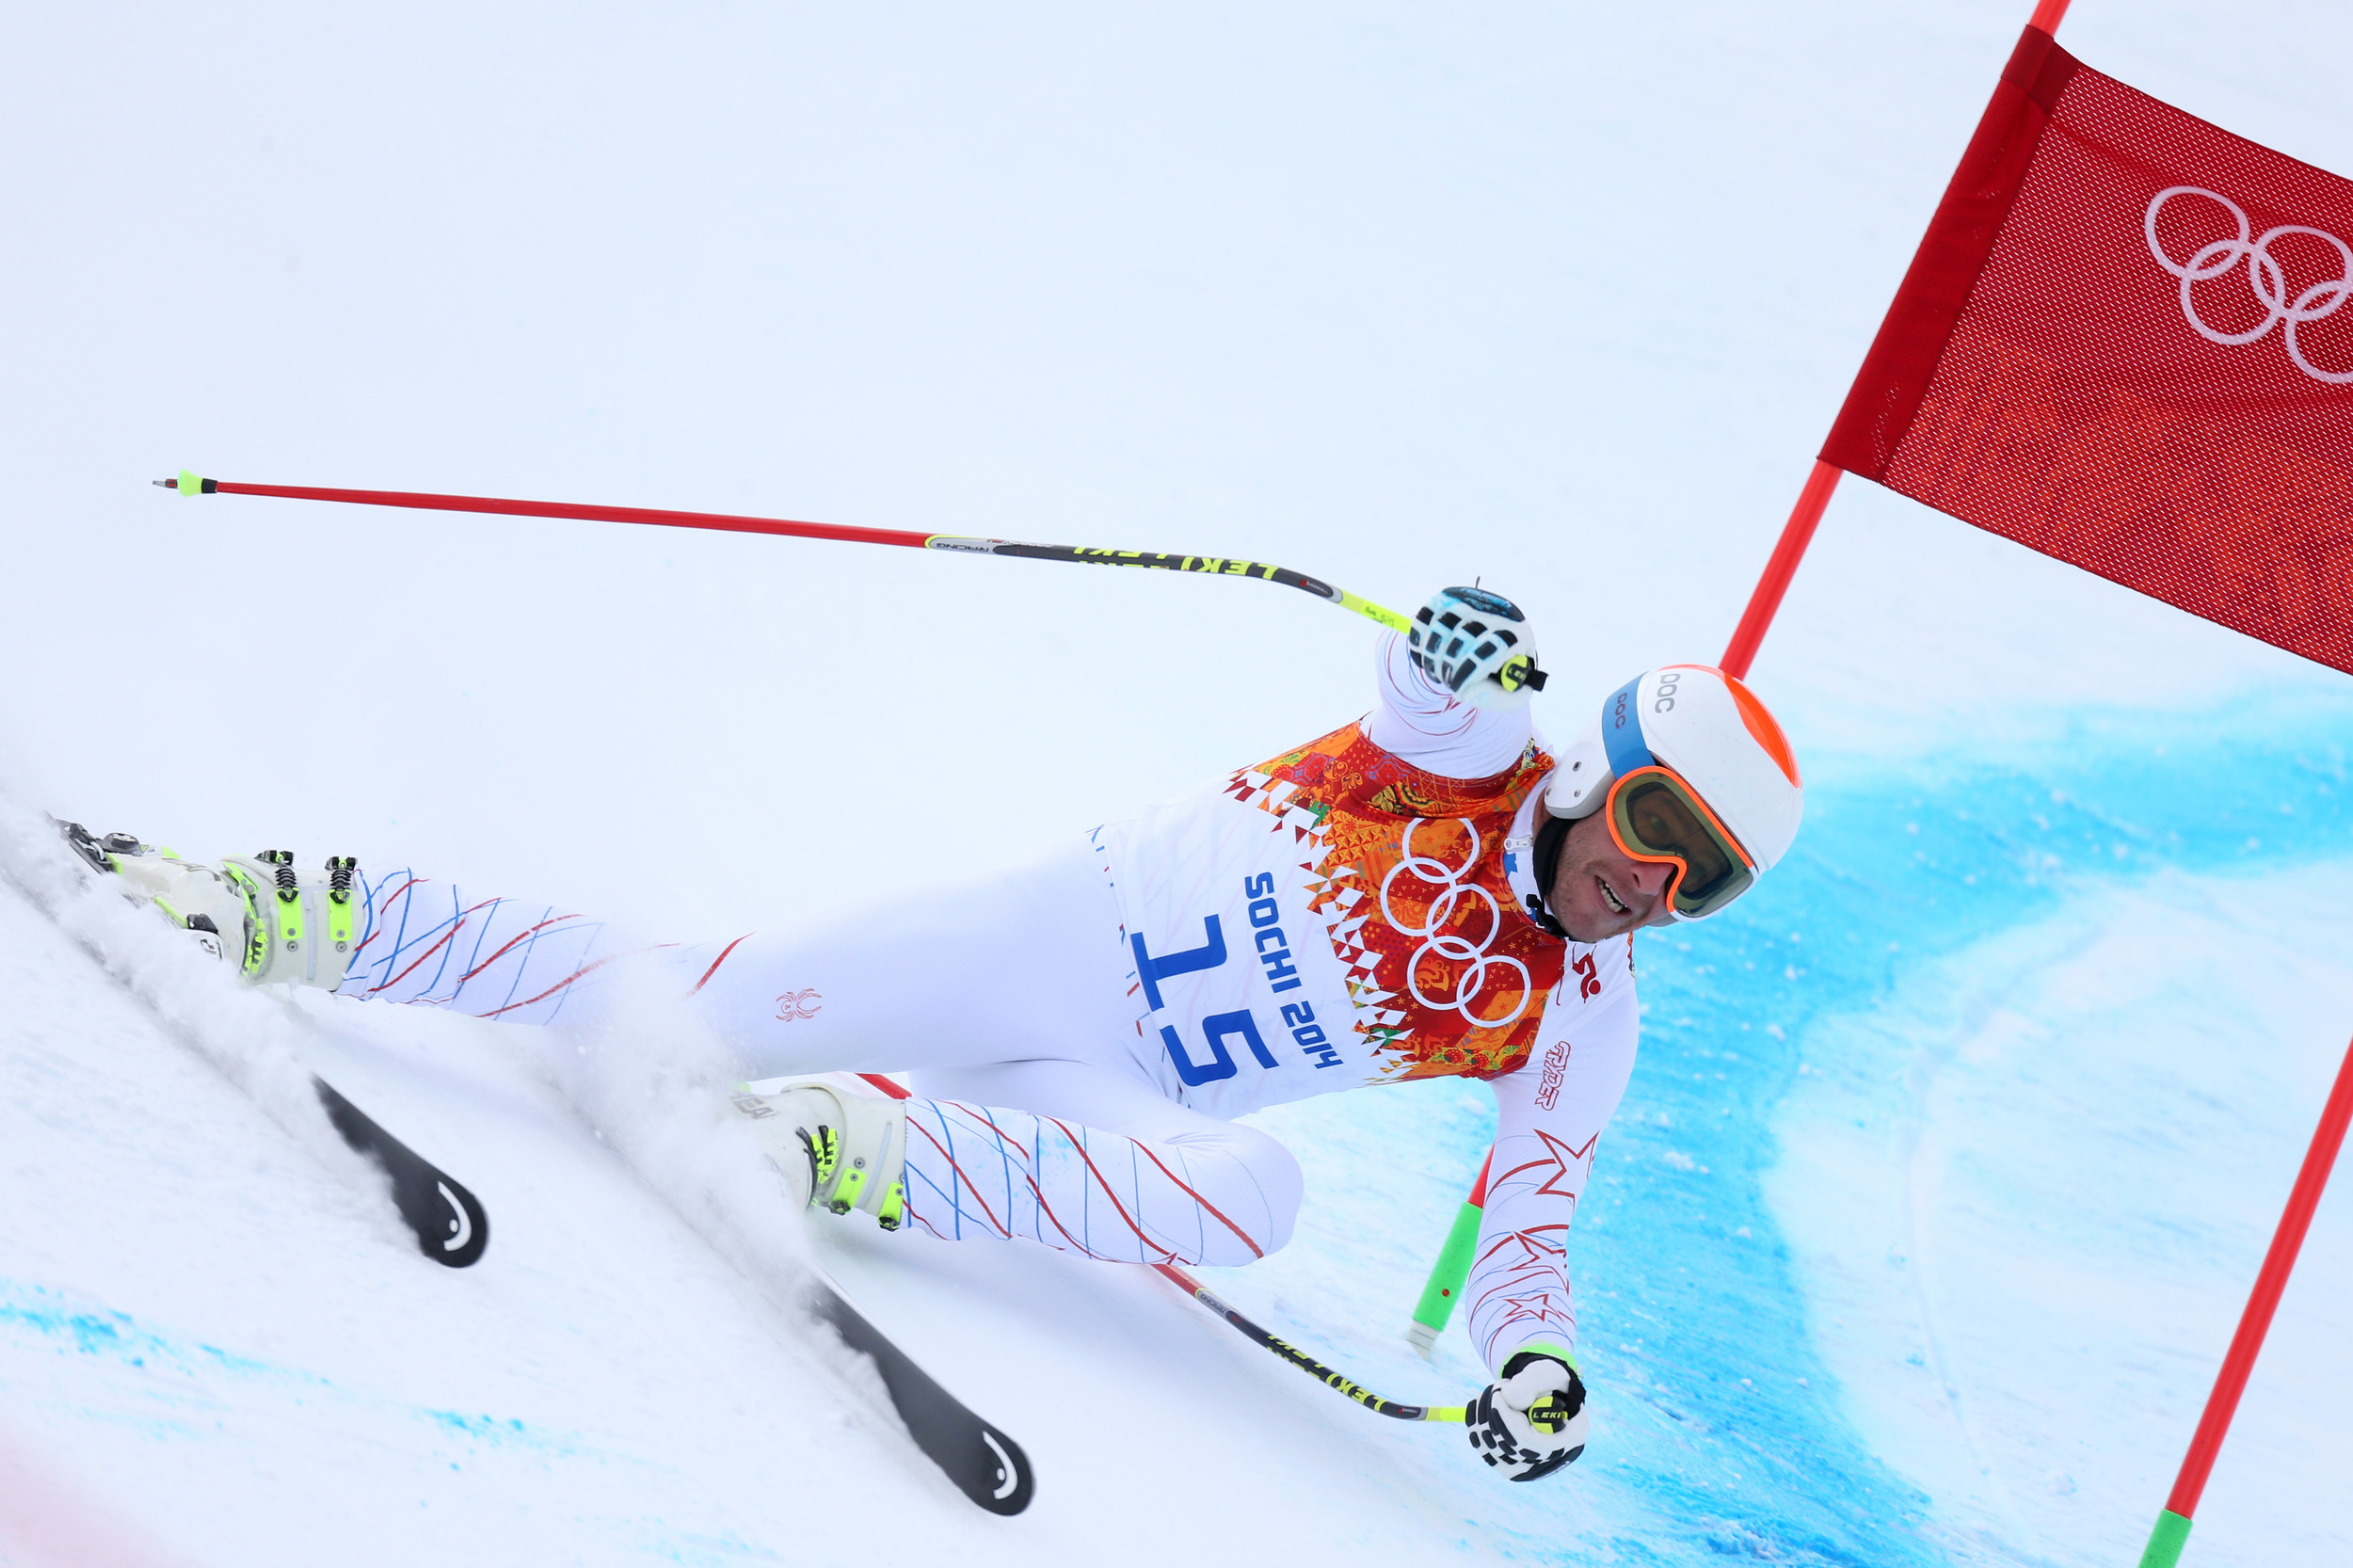 Downhill Skiing At The Olympics In Sochi Wallpaper And